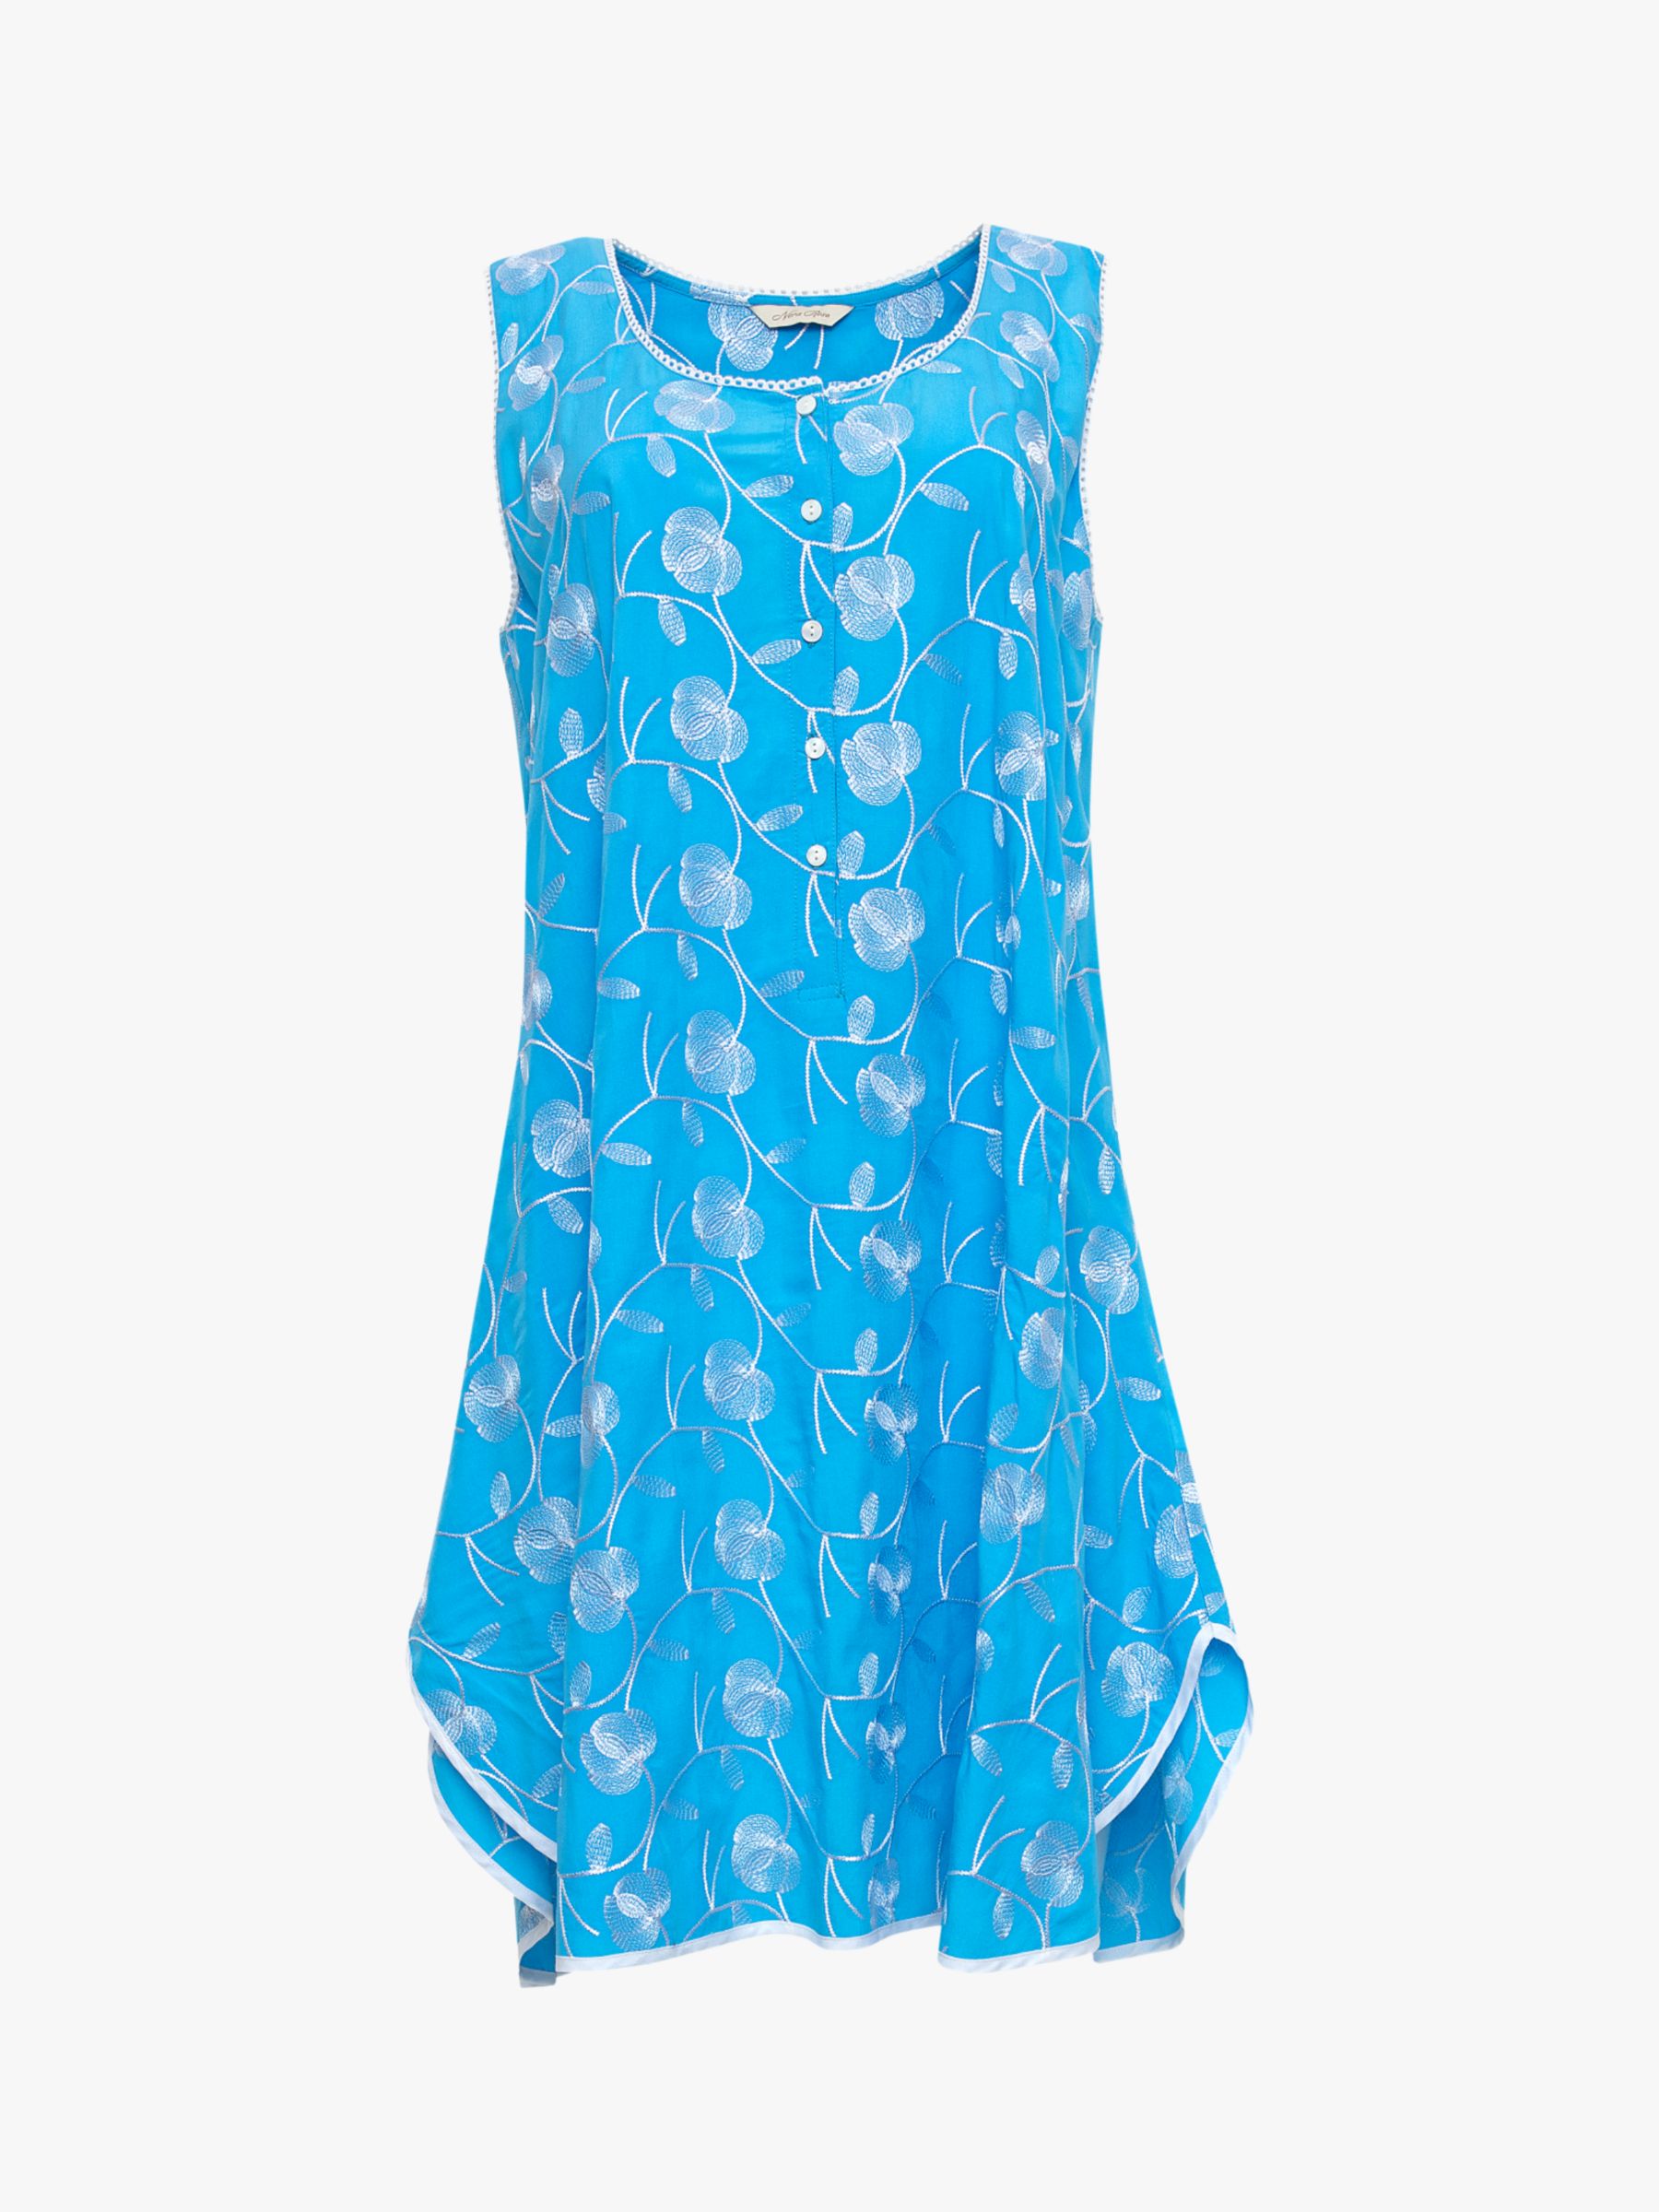 Buy Cyberjammies Leona Floral Embroidered Swing Nightdress, Blue Online at johnlewis.com